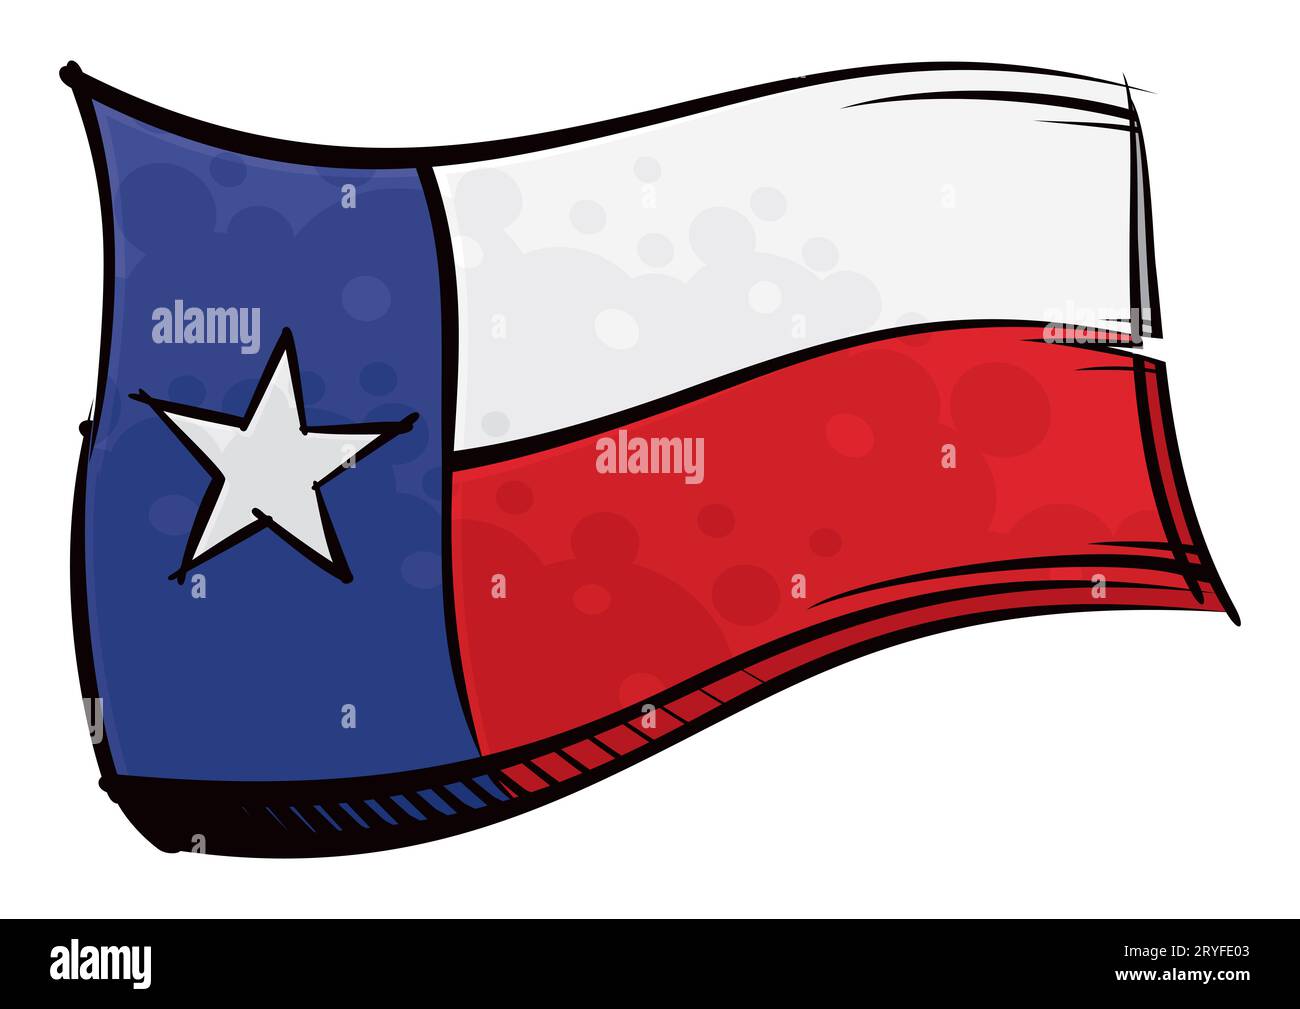 State of Texas flag created in graffiti paint style Stock Photo